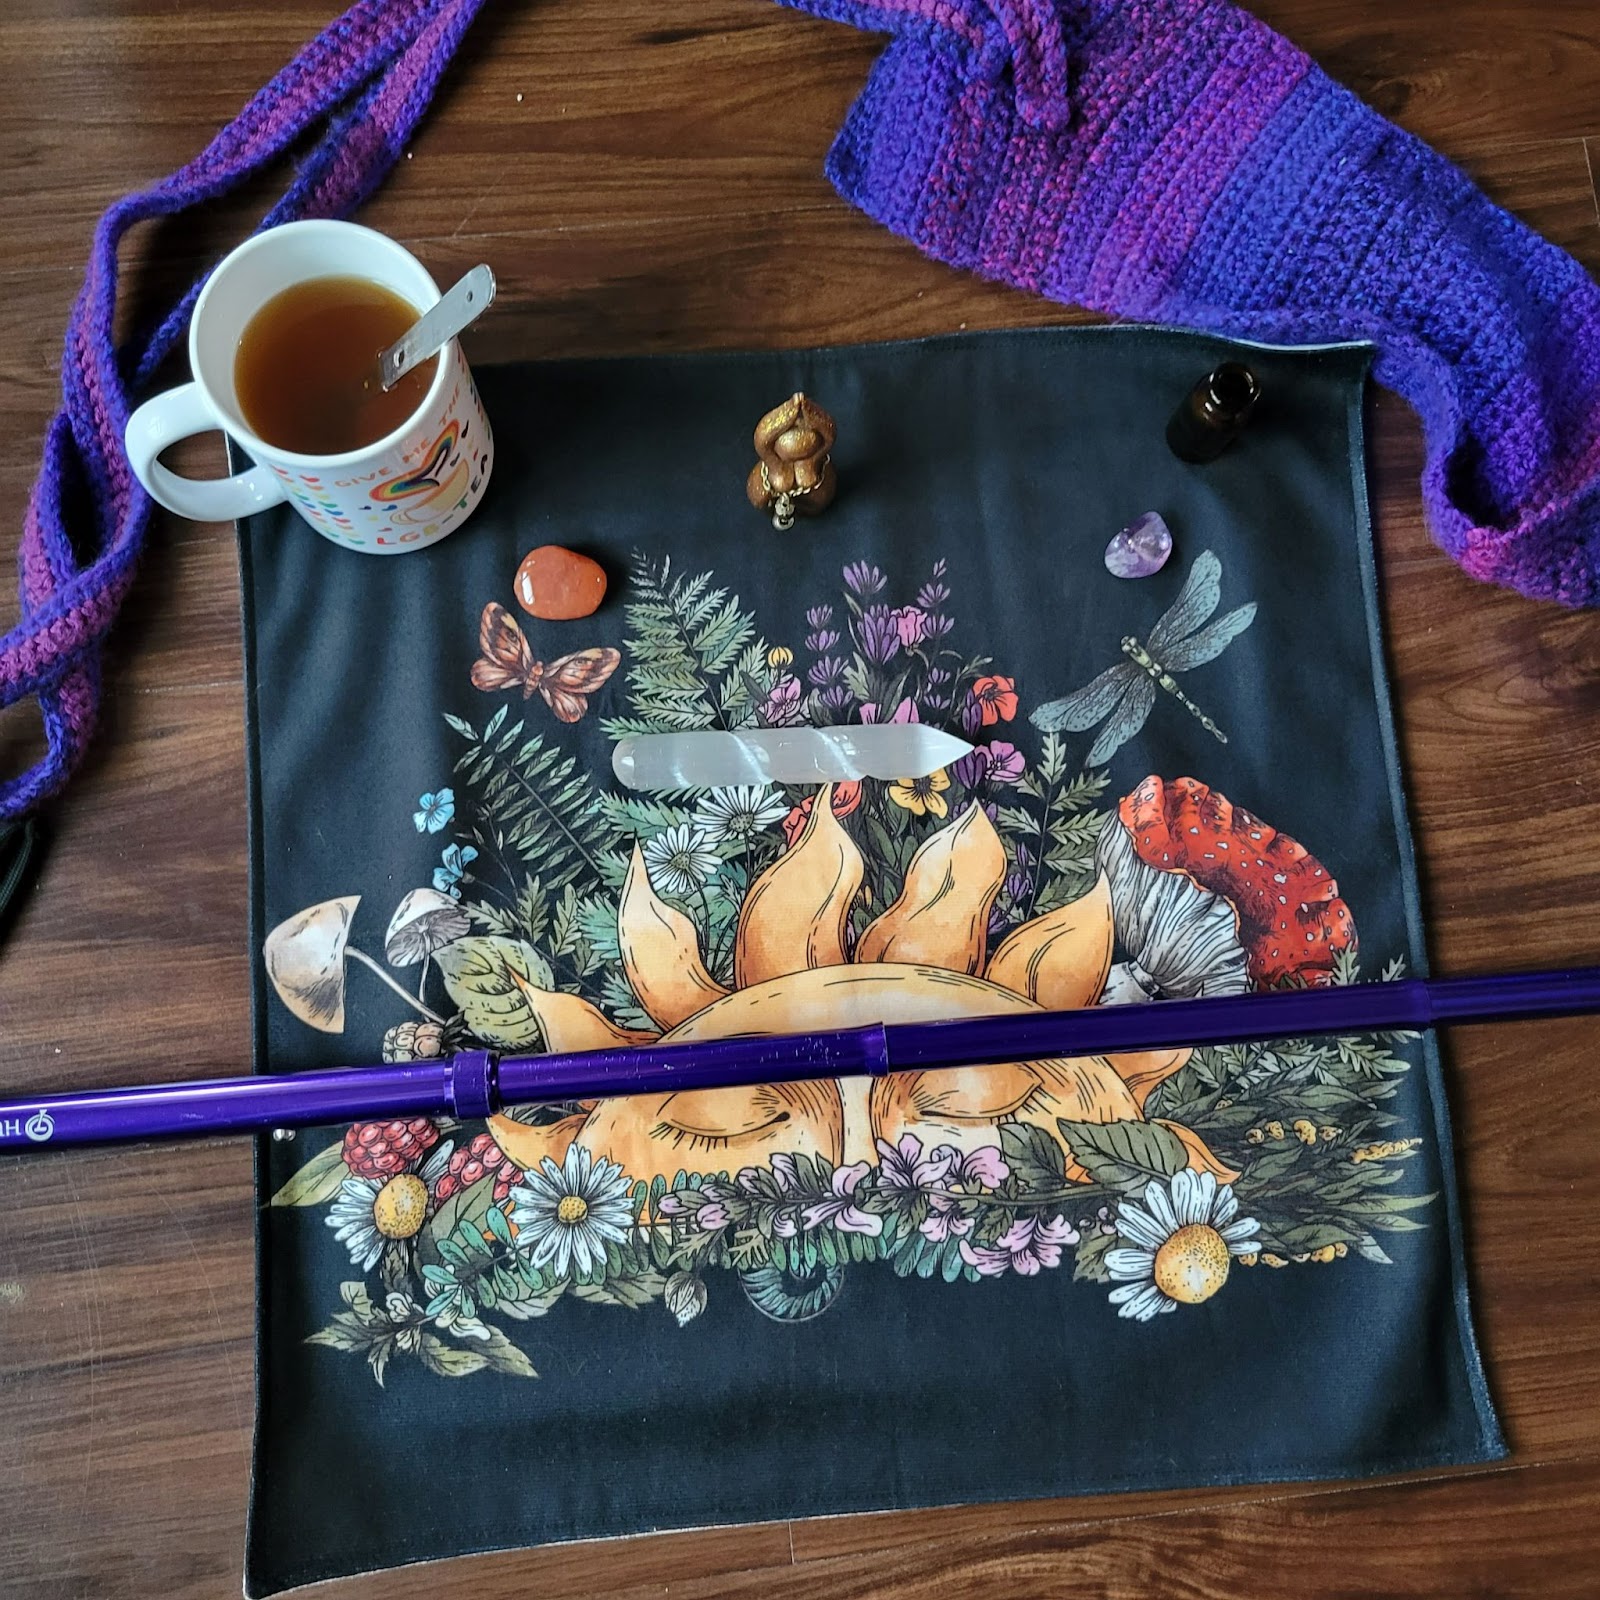 Image description: a purple walking cane is laid across a tarot cloth decorated with flowers, mushrooms, and a rising sun. Above the cane is laid out a selenite wand, carnelian and amethyst stones, a Hestia statue, a mug of tea, a smaller apothecary bottle, and a purple crocheted cane holder.